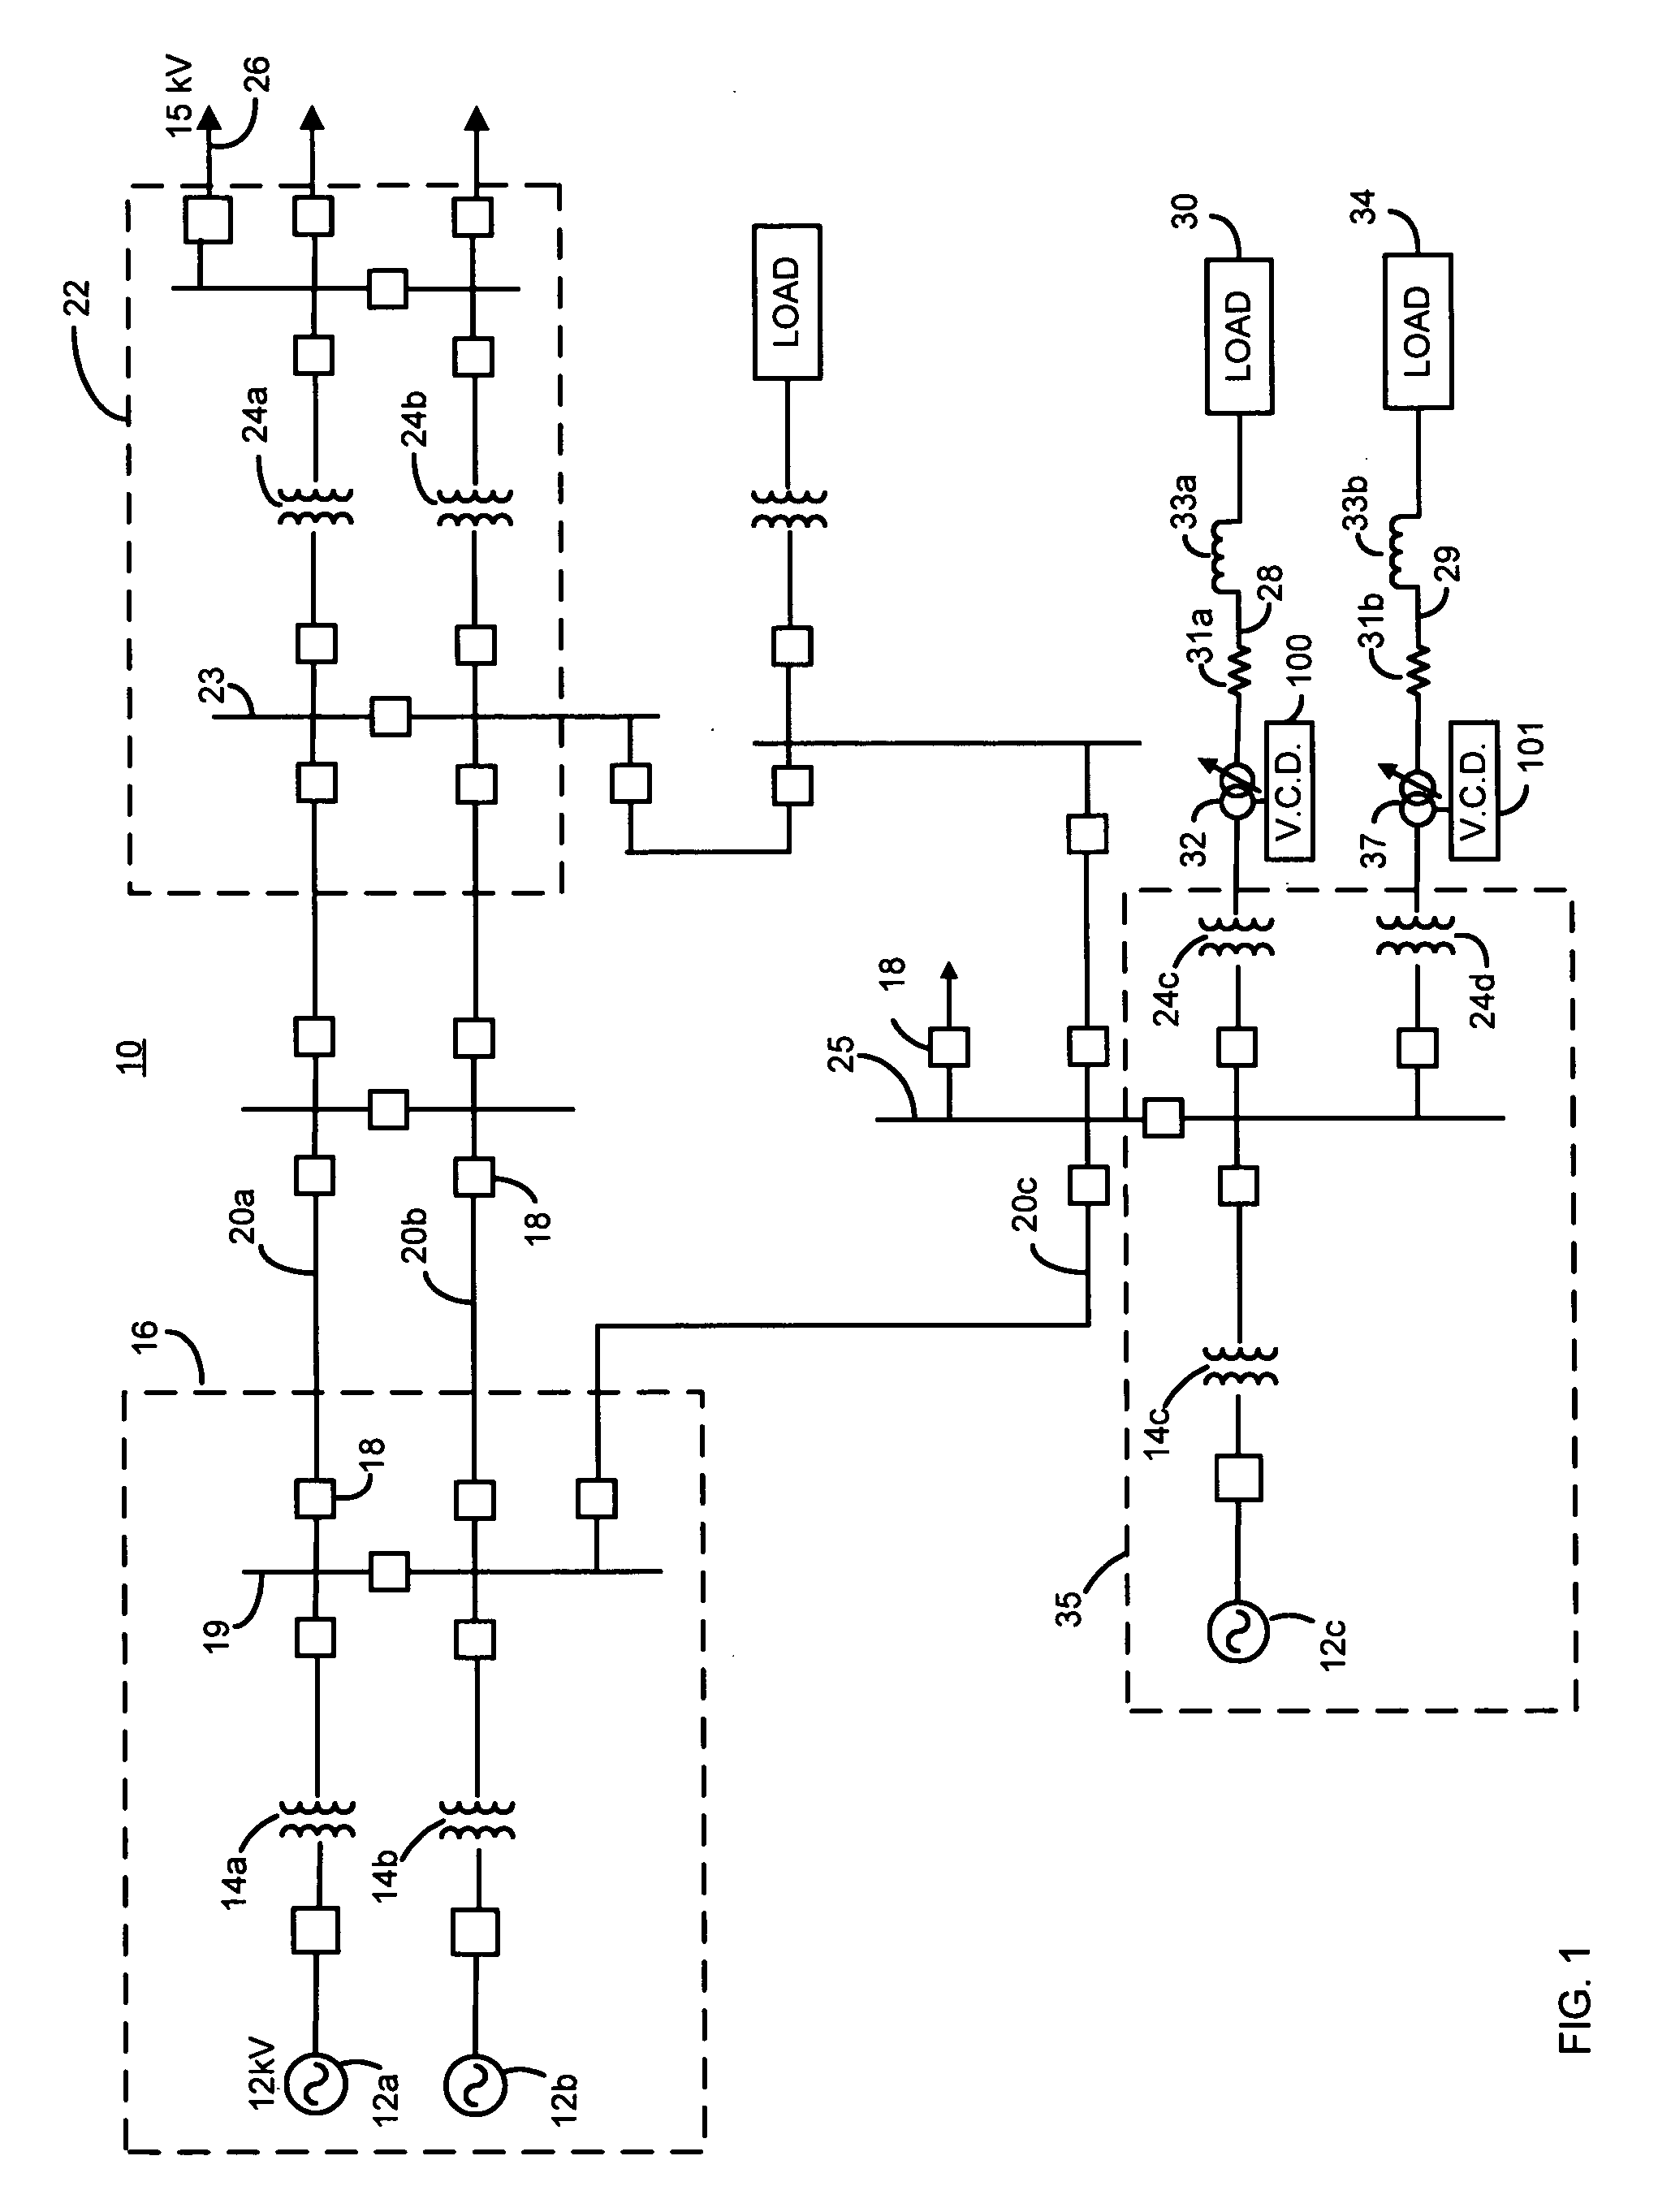 Apparatus and methods for providing a voltage adjustment for single-phase voltage regulator operation in a three-phase power system